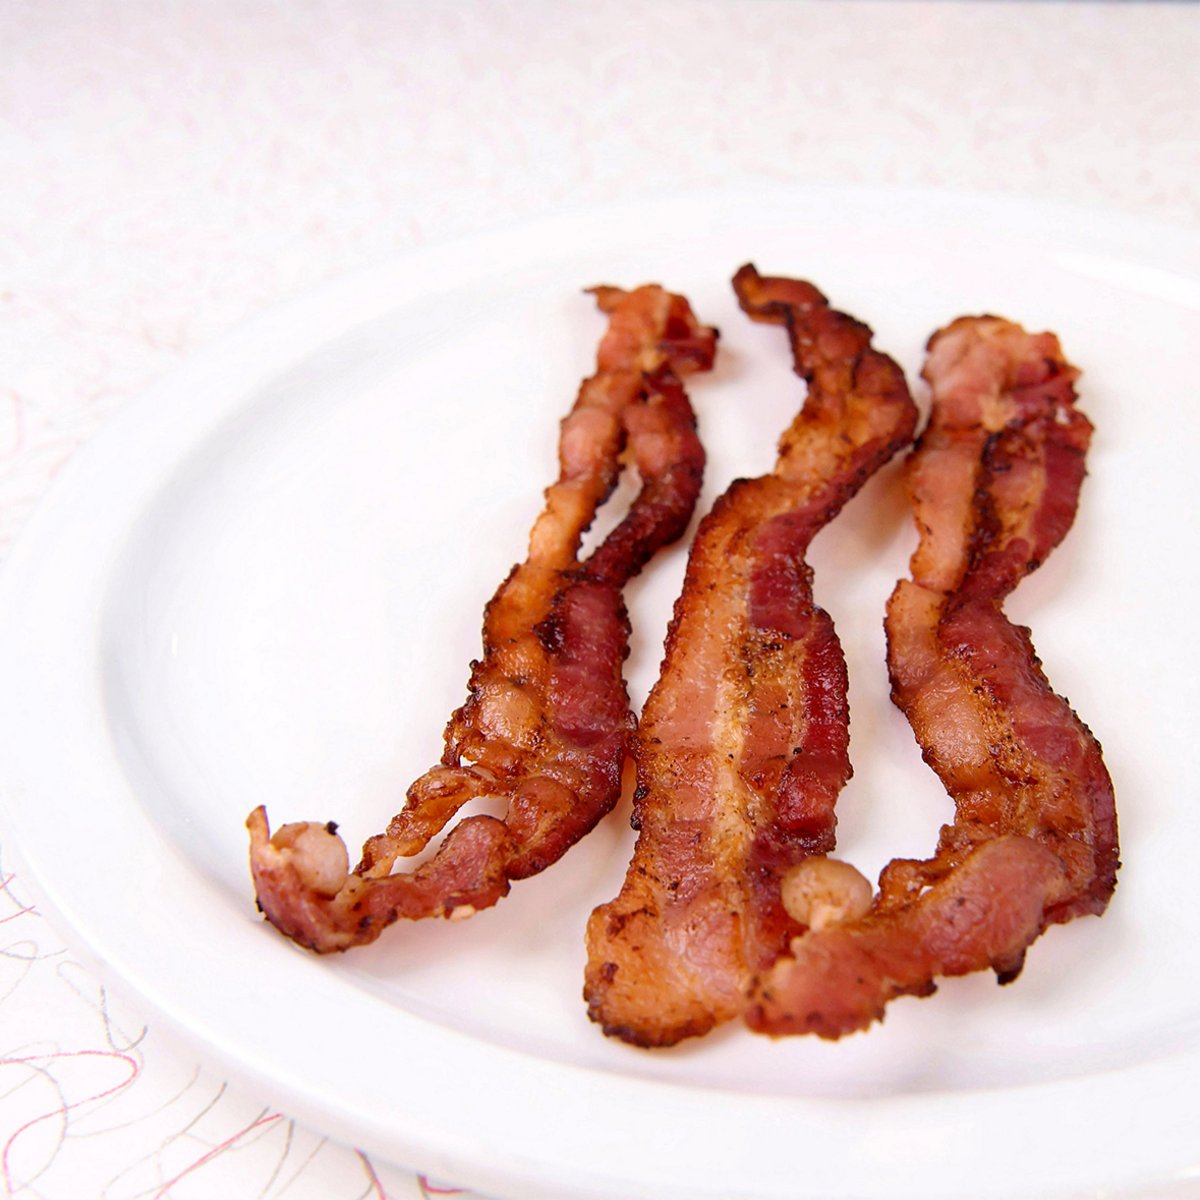 #Bacon makes everything a little better. Don't you agree? Come by Penny's Diner North Platte and add a side of bacon. We won't tell 🤫🤐 #PennysDiner #instayum